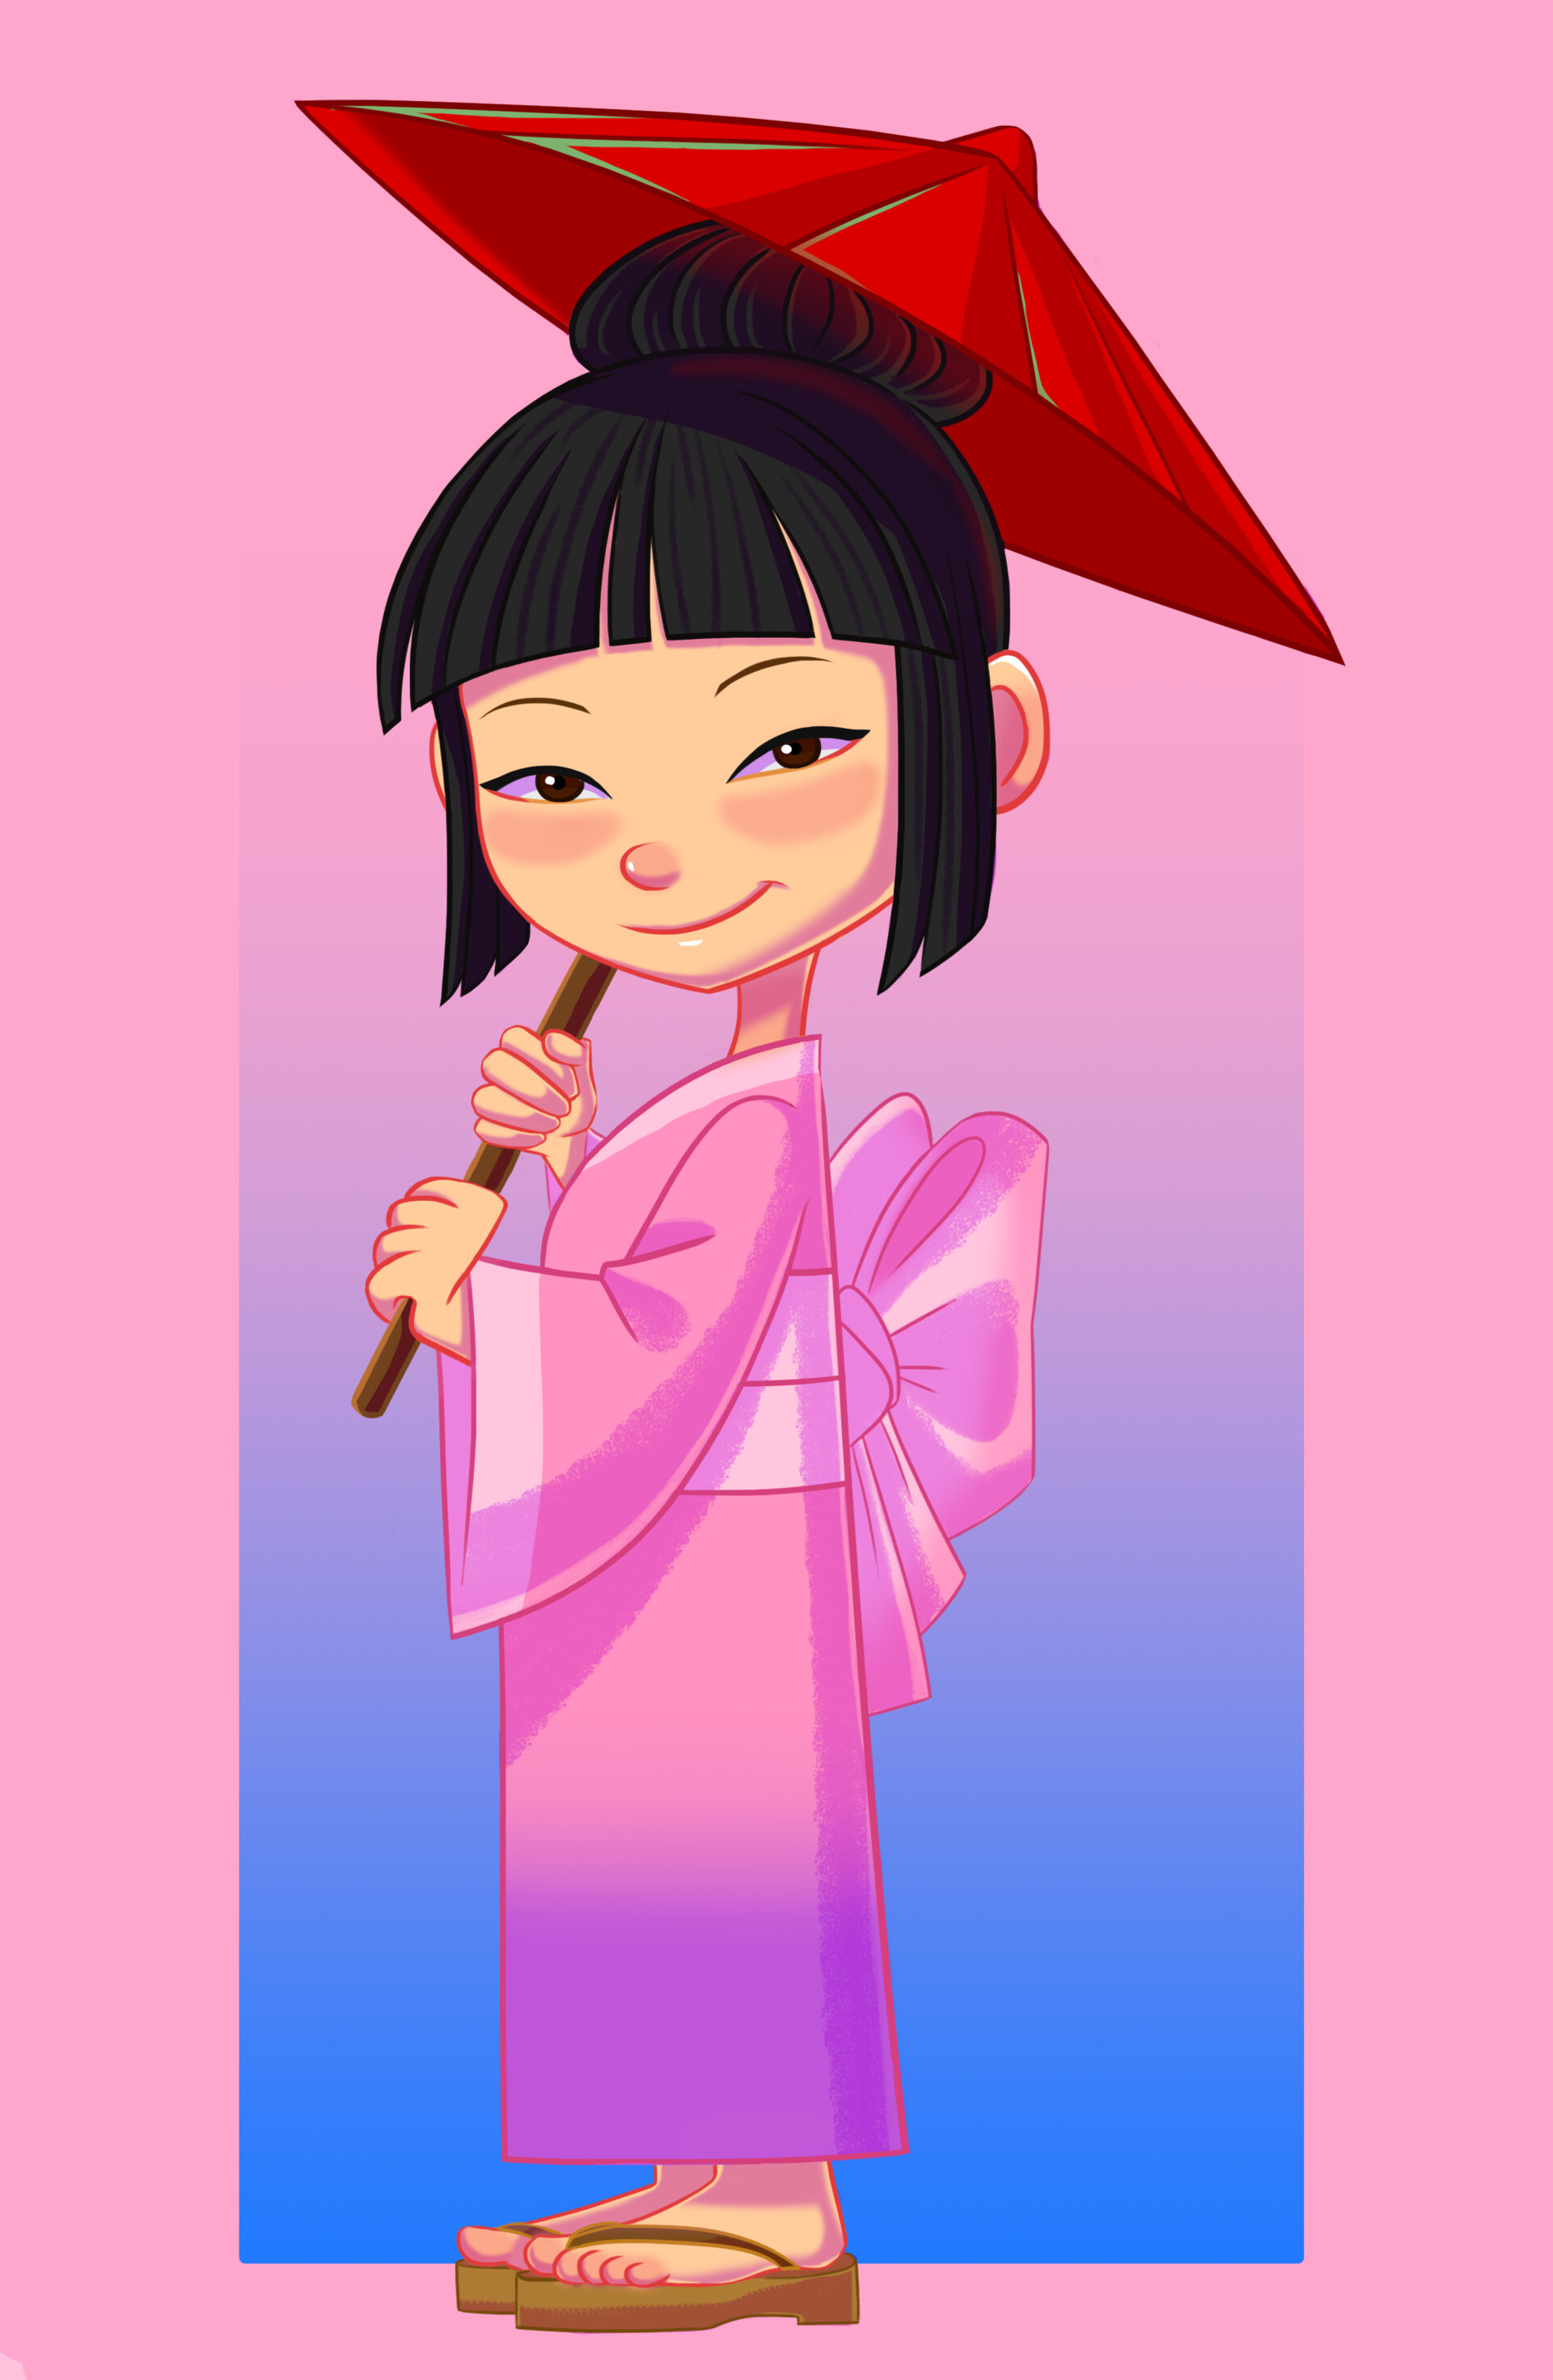 How to Draw a Kimono · Art Projects for Kids